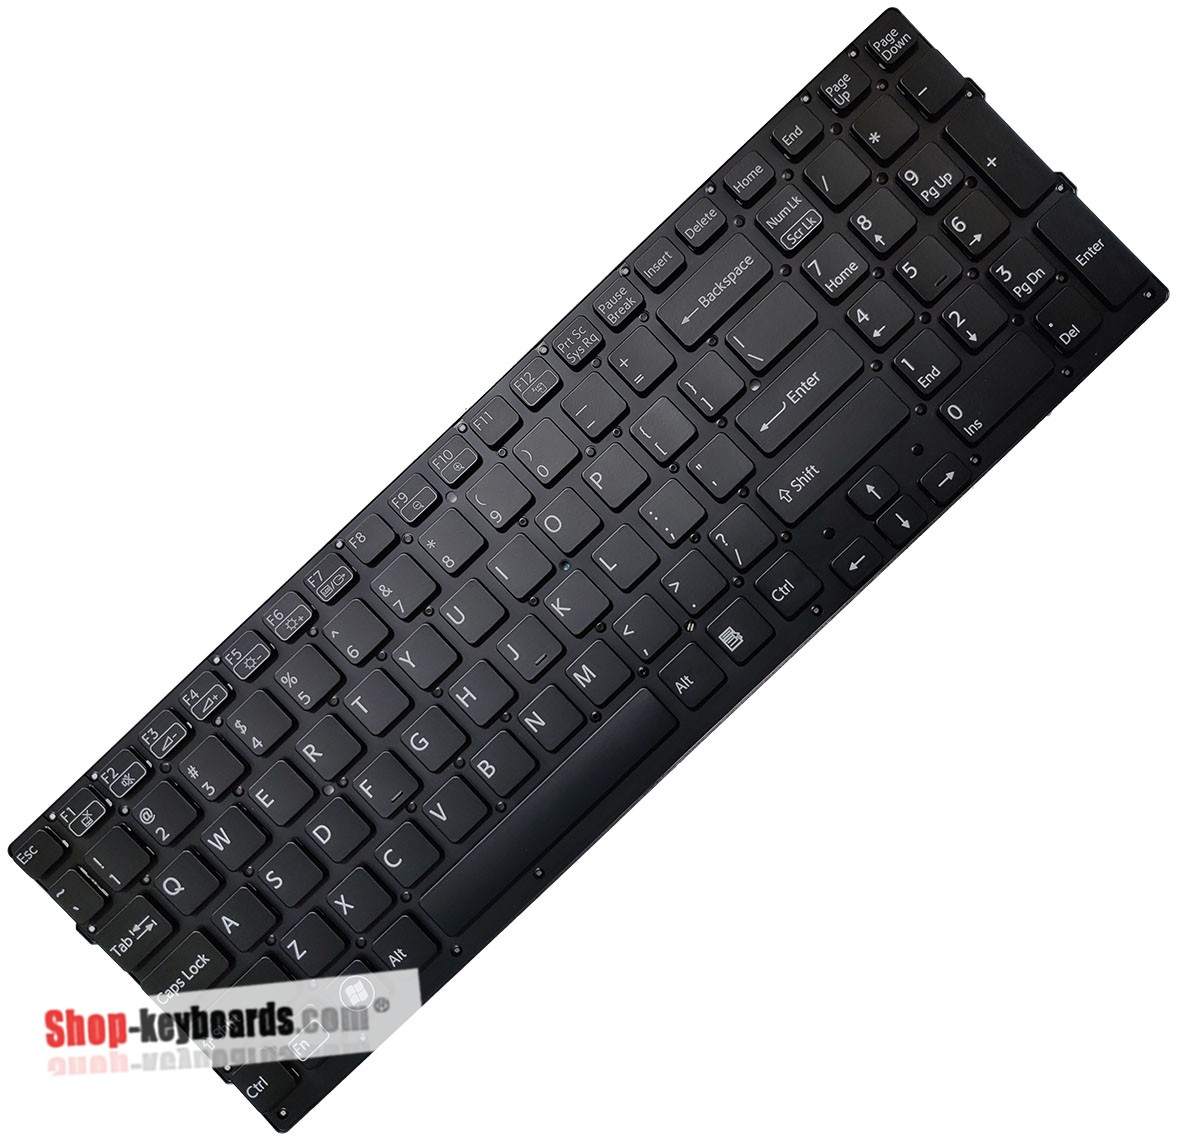 Sony VAIO VPC-F22S1E/B Keyboard replacement